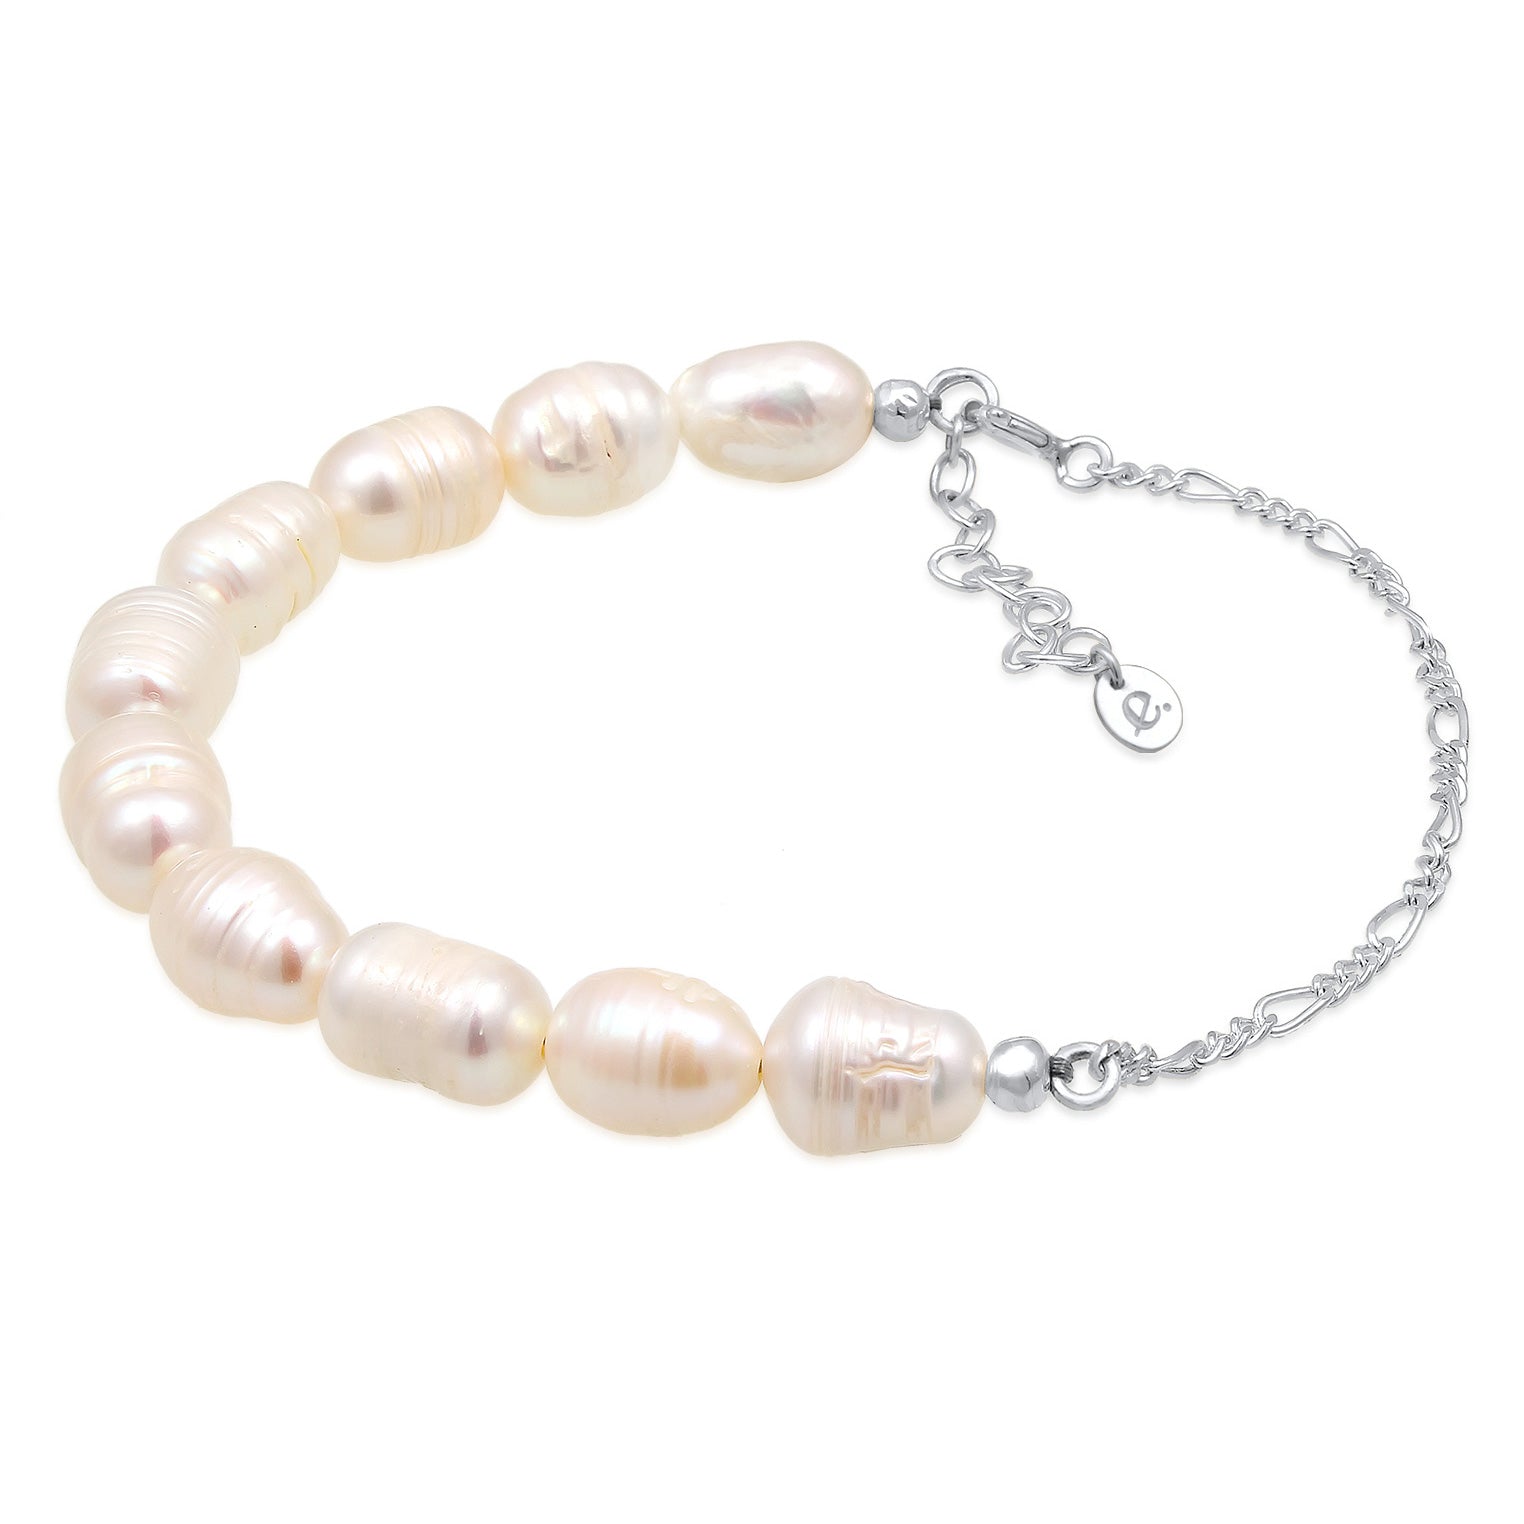 Freshwater pearls in Baroque style Elli Jewelry at – Elli